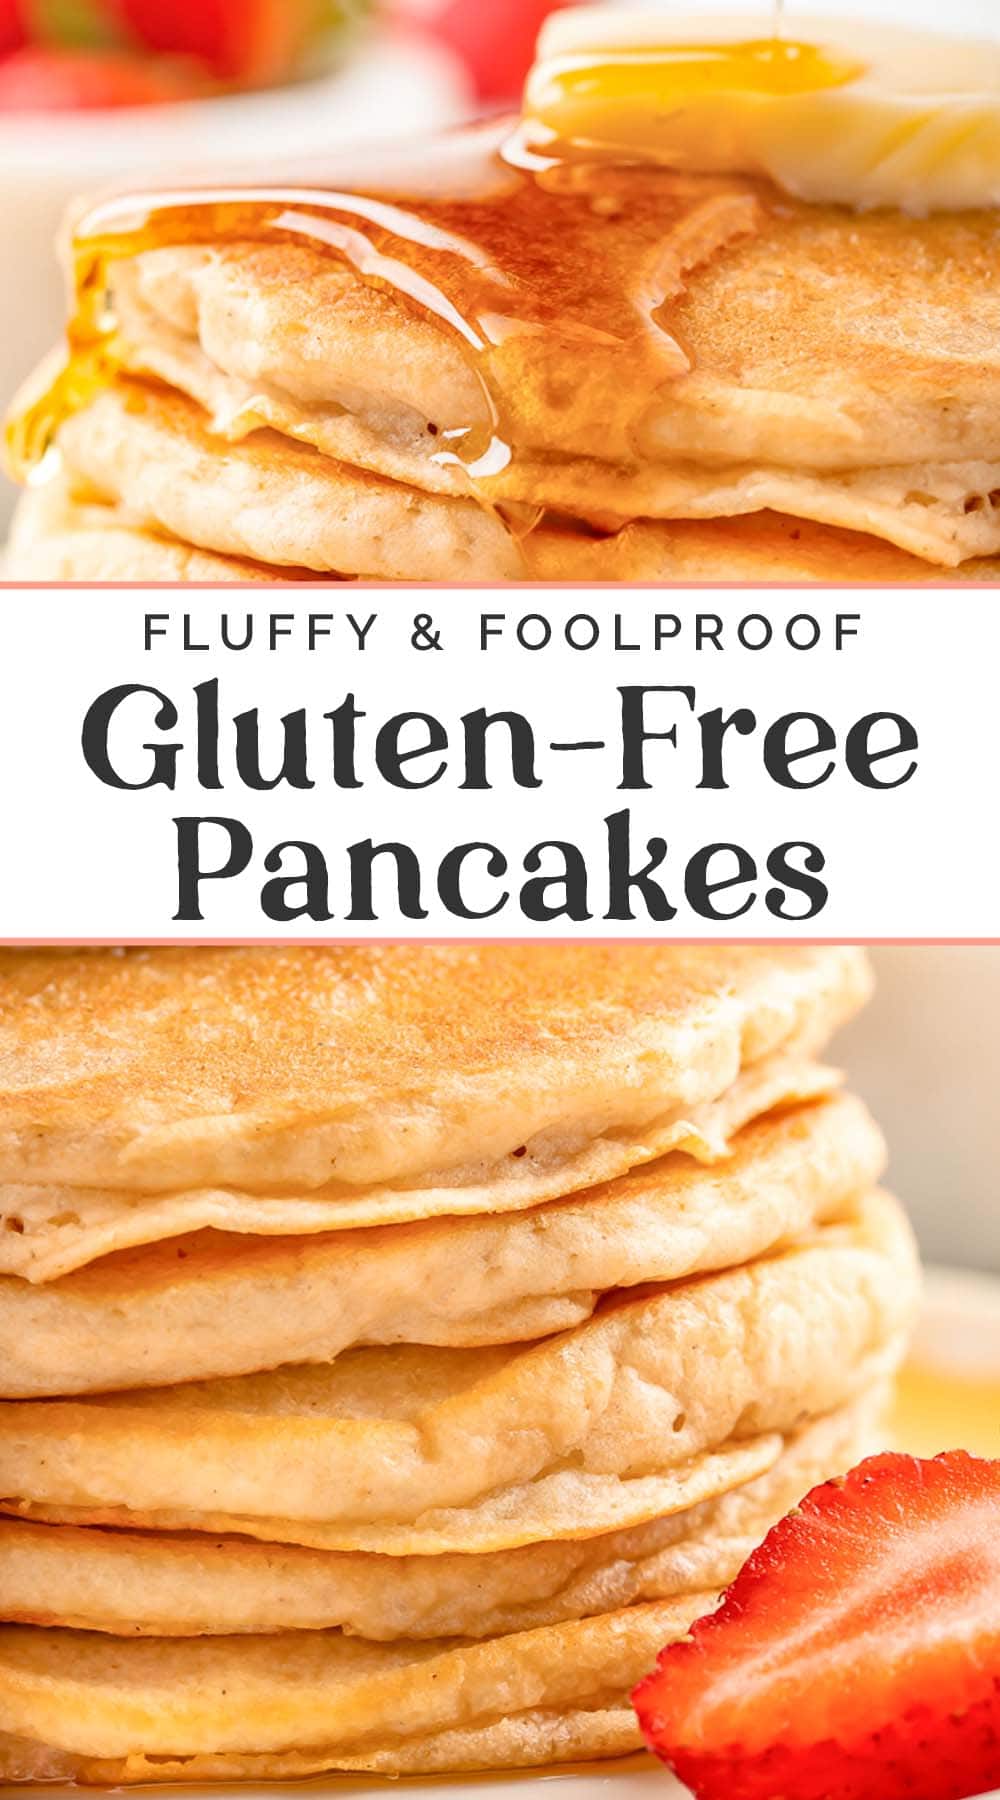 Pin graphic for gluten-free pancakes.